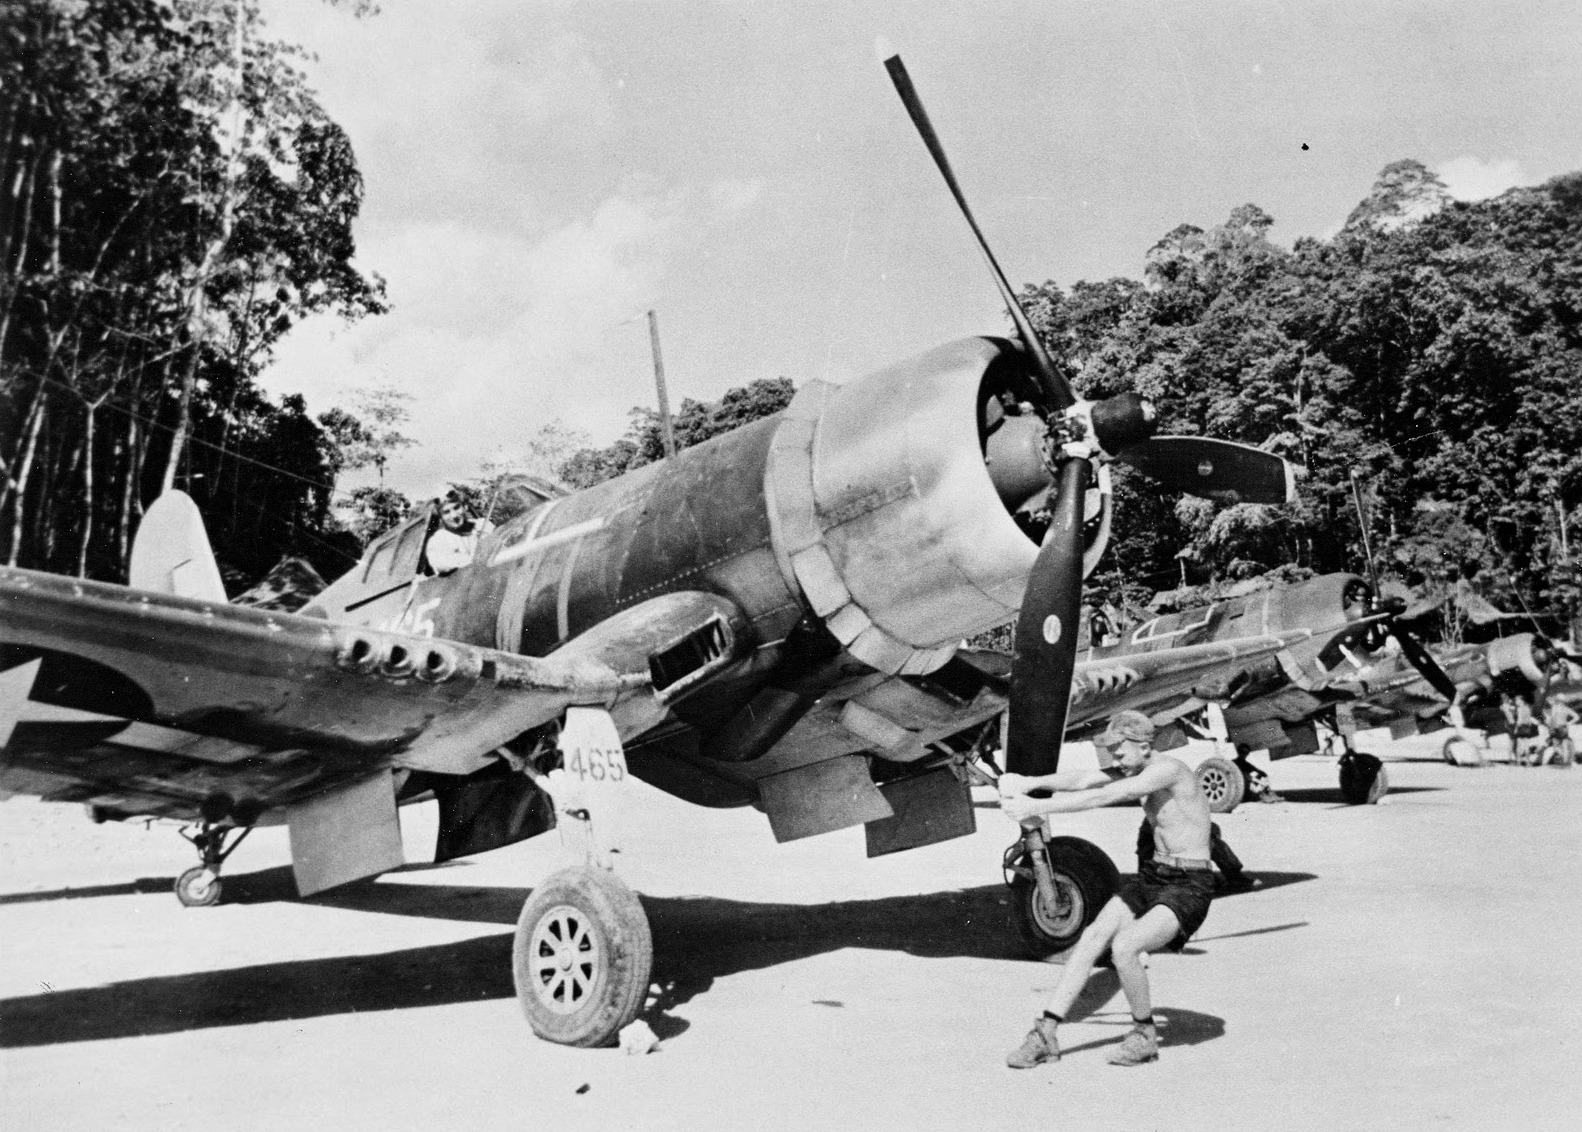 Crewman pulls the propeller through on an F4U-1 Corsair of Marine Fighting Squadron 218 at Barakoma Airfield, Vella Lavella, Solomon Islands, 1943. Note the general sandblasted look of the aircraft after long exposure to tropical winds and coral dust.